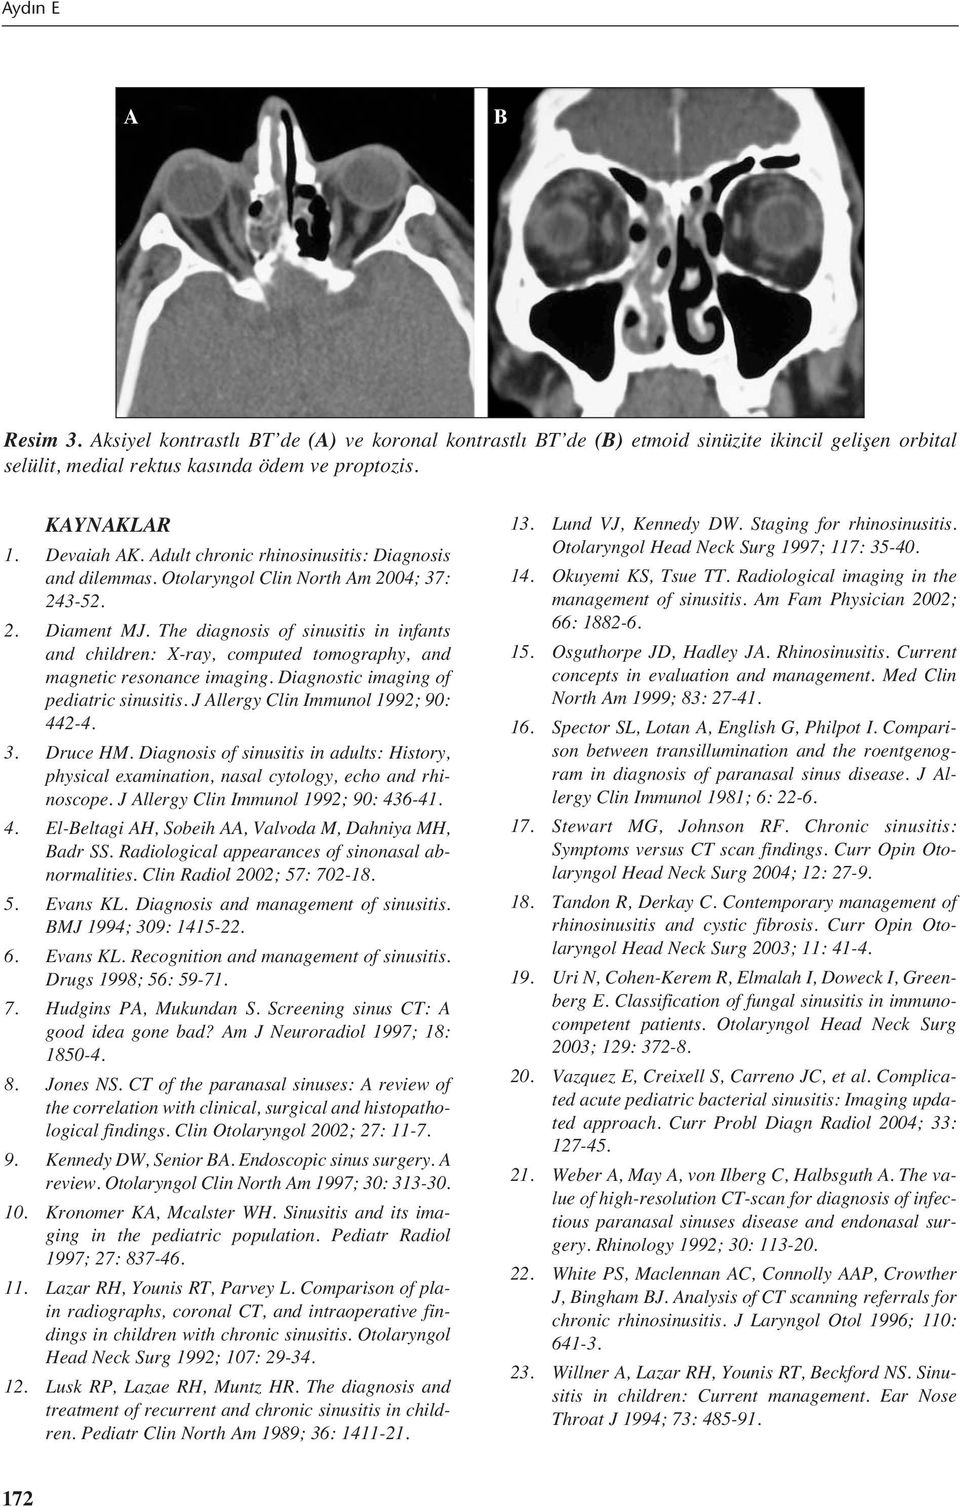 The diagnosis of sinusitis in infants and children: X-ray, computed tomography, and magnetic resonance imaging. Diagnostic imaging of pediatric sinusitis. J Allergy Clin Immunol 1992; 90: 442-4. 3.